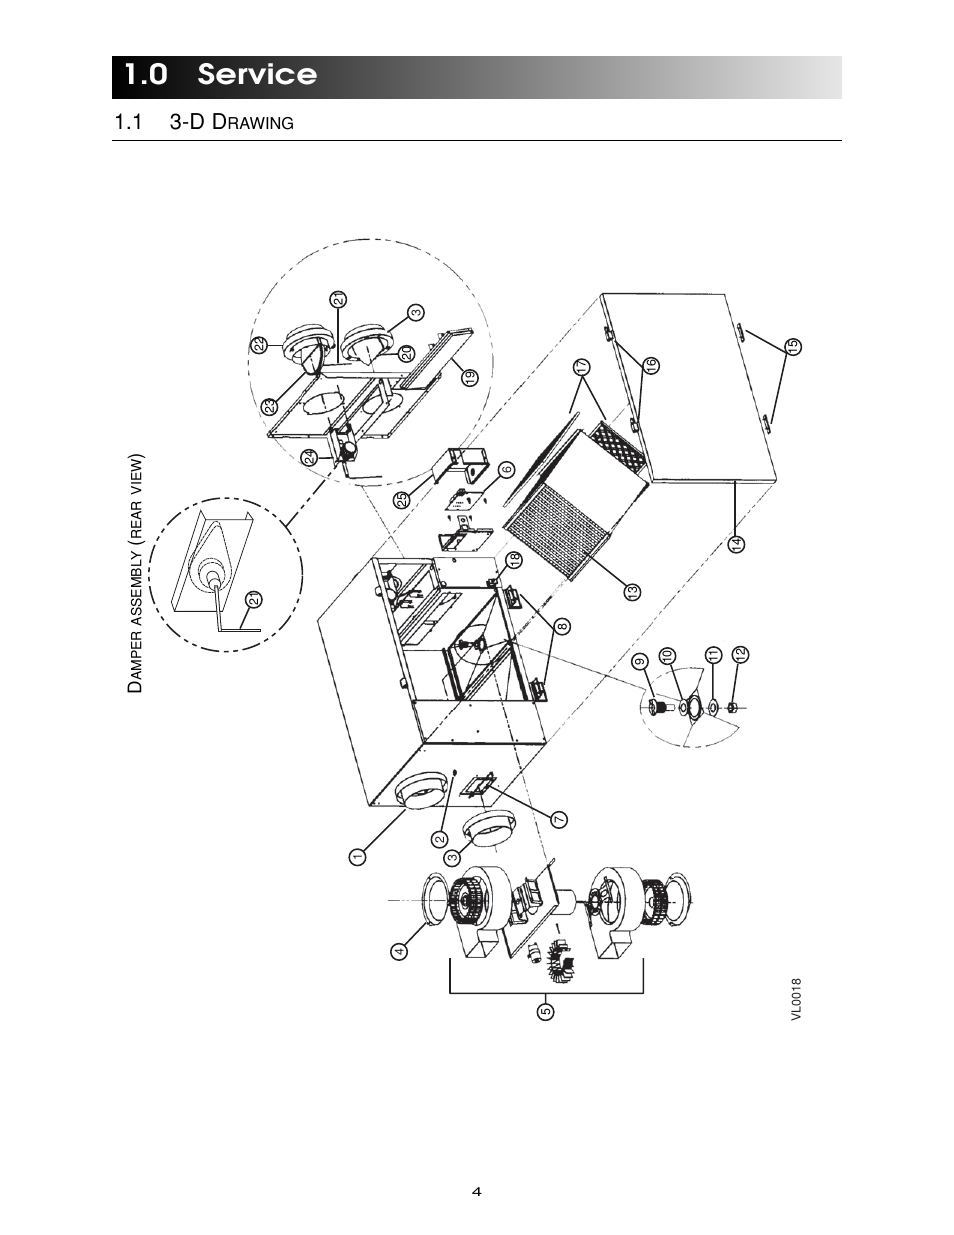 0 service, 1 3-d d | Maytag Ventilation Systems HRV-210 User Manual | Page 4 / 32